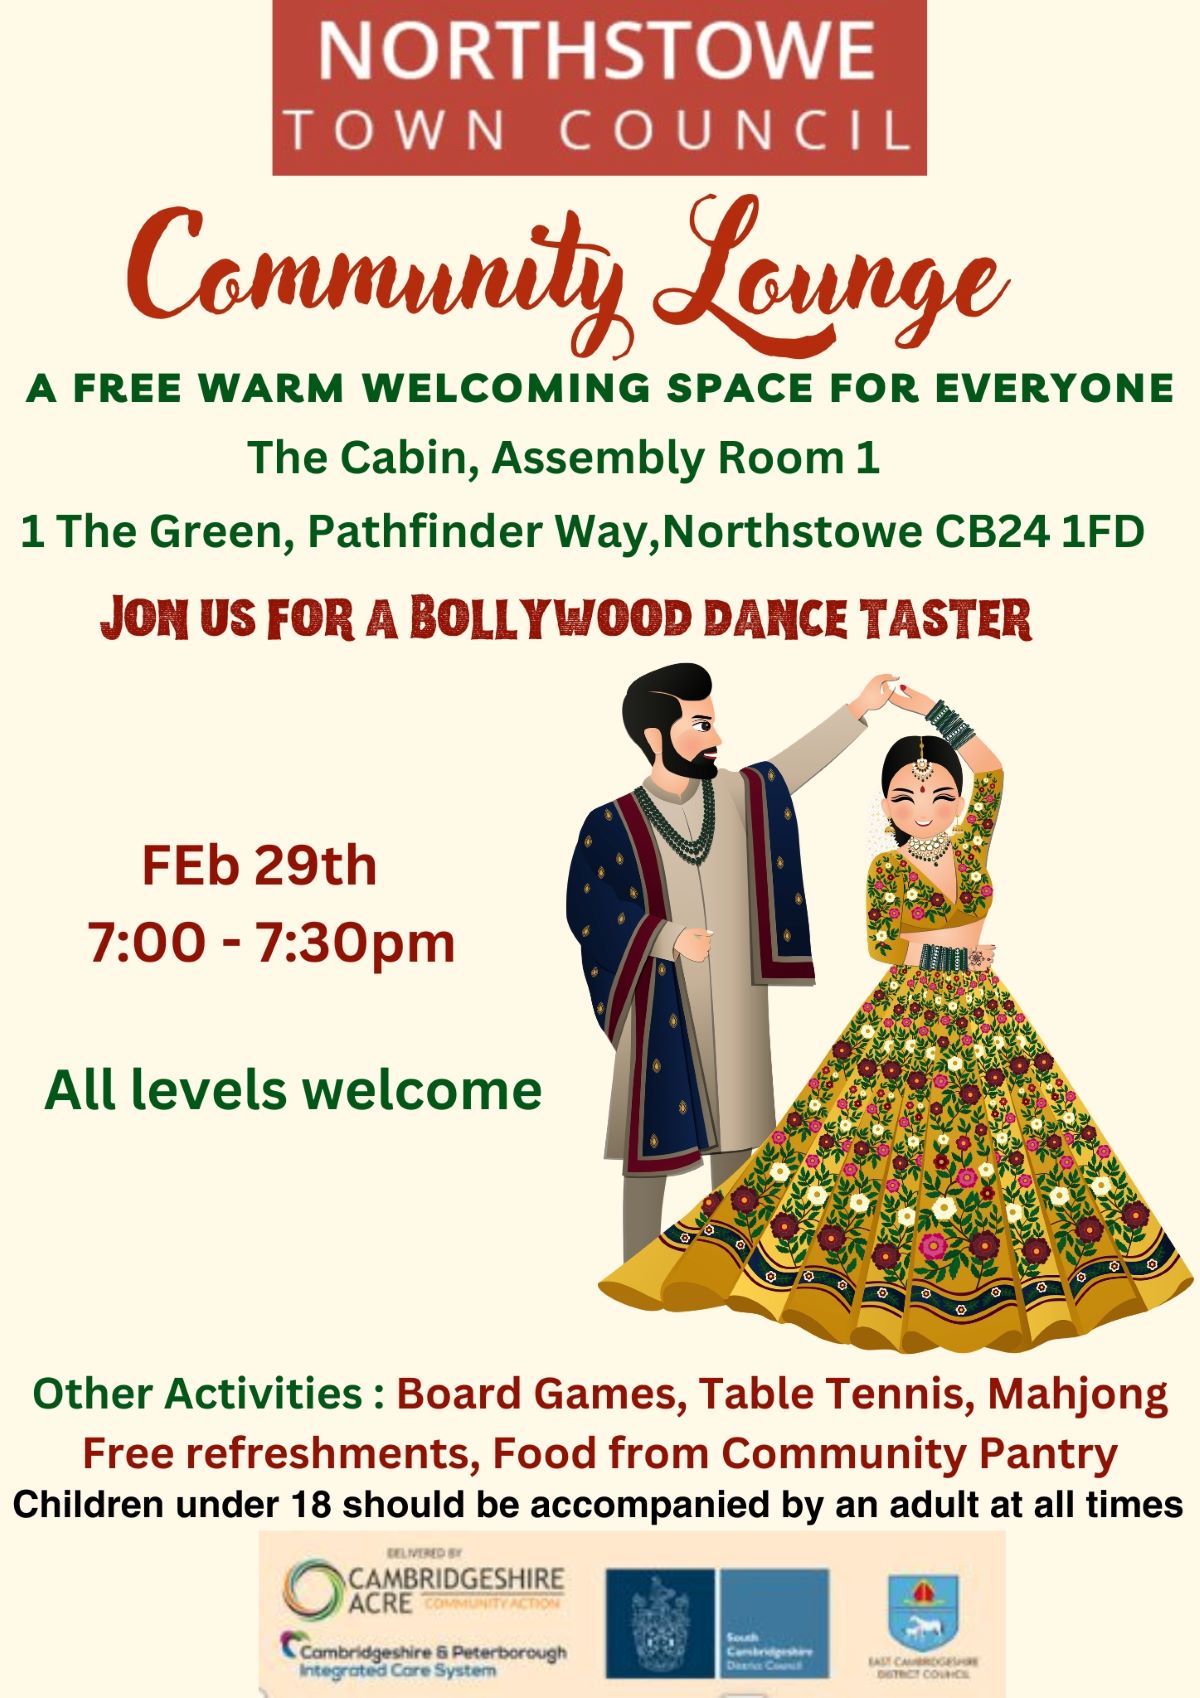 Free Bollywood Dance session_Thu 29th Feb at the #NorthstoweCommunityLounge